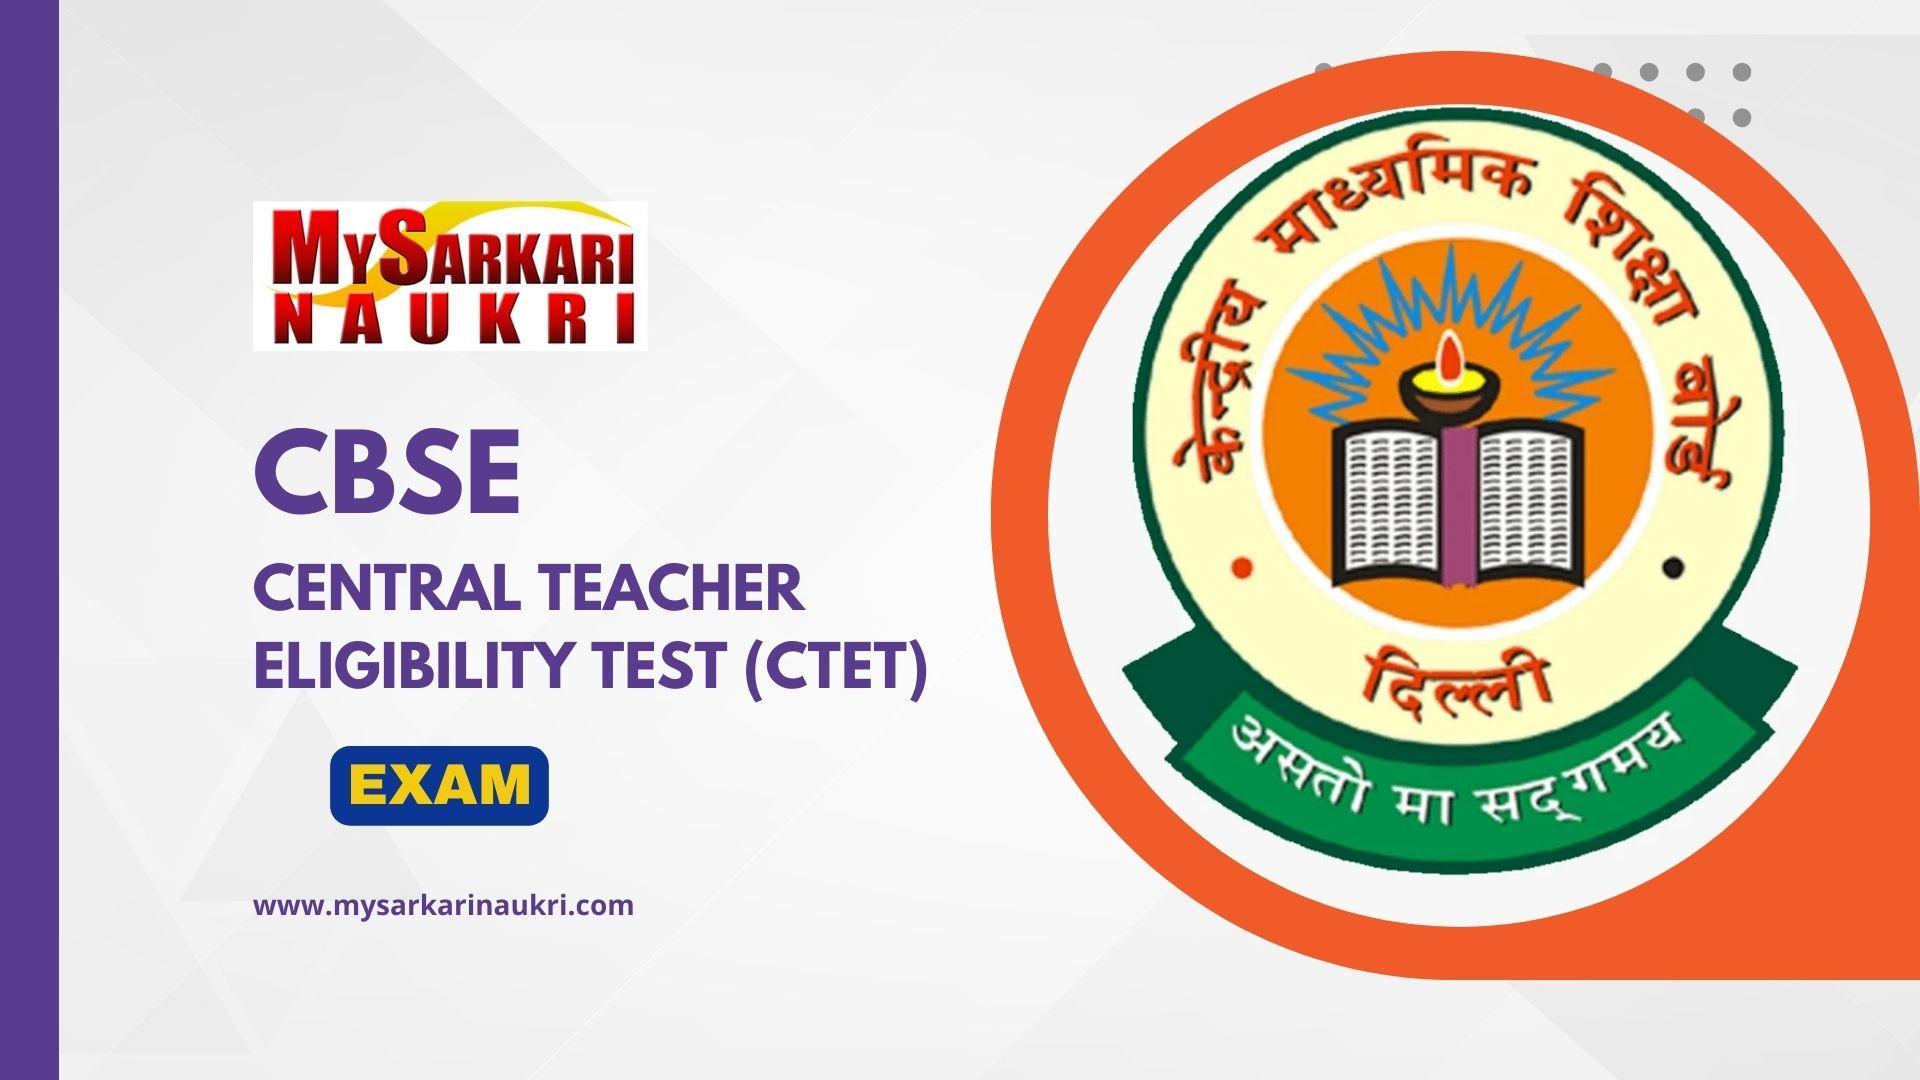 CTET 2022: CBSE releases important notice for CTET candidates on ctet.nic.in  | Jobs News, Times Now